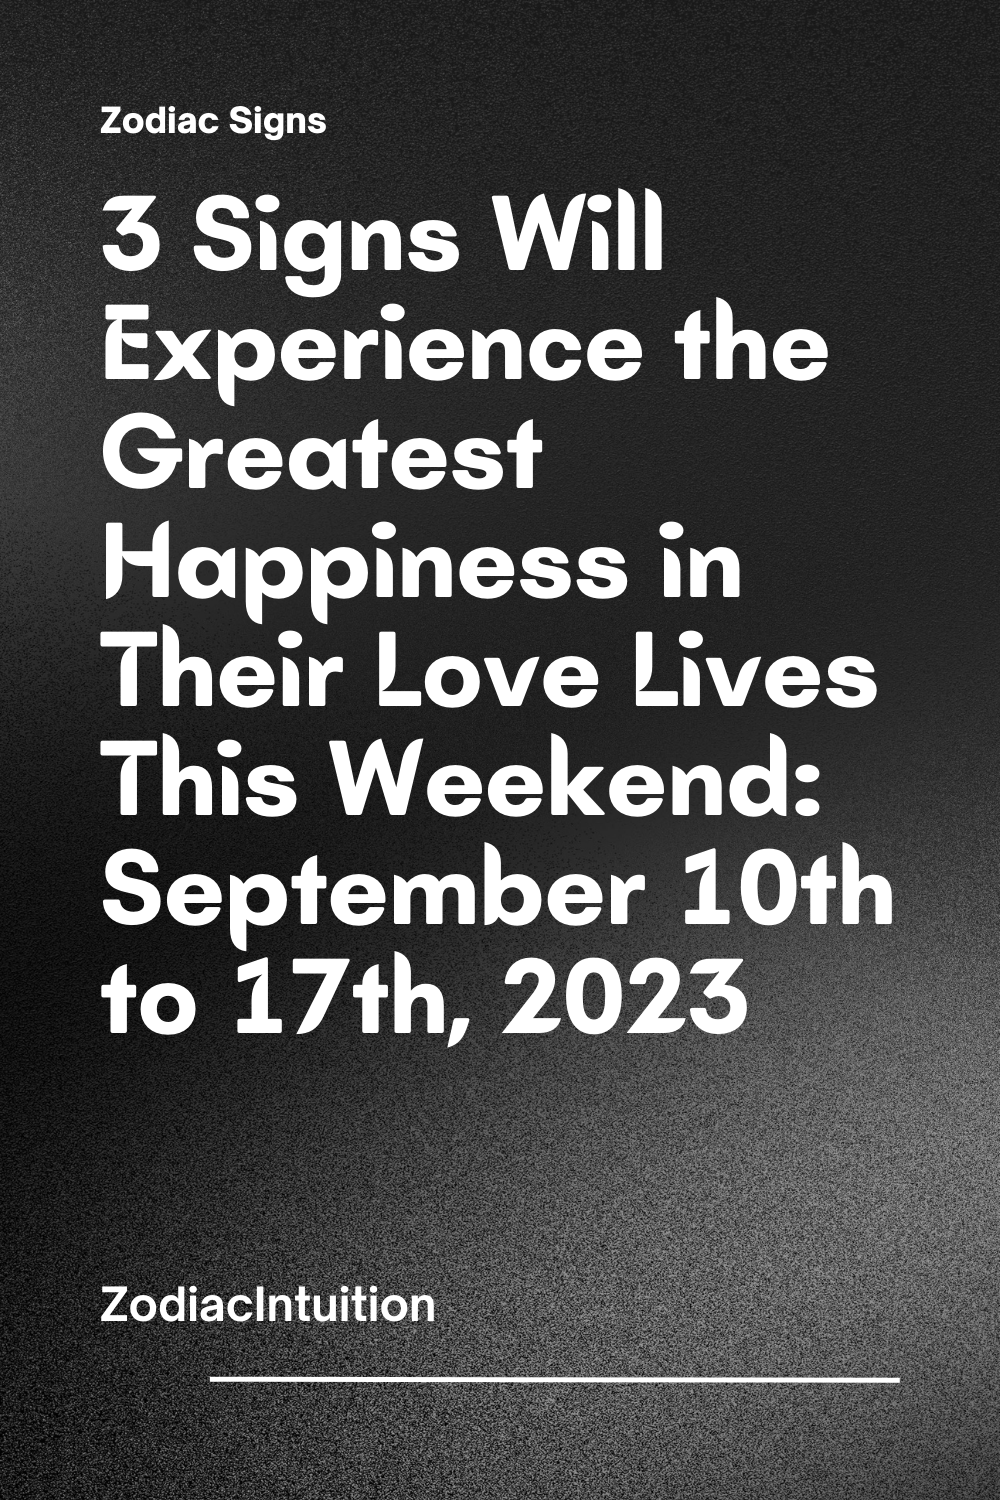 3 Signs Will Experience the Greatest Happiness in Their Love Lives This Weekend: September 10th to 17th, 2023